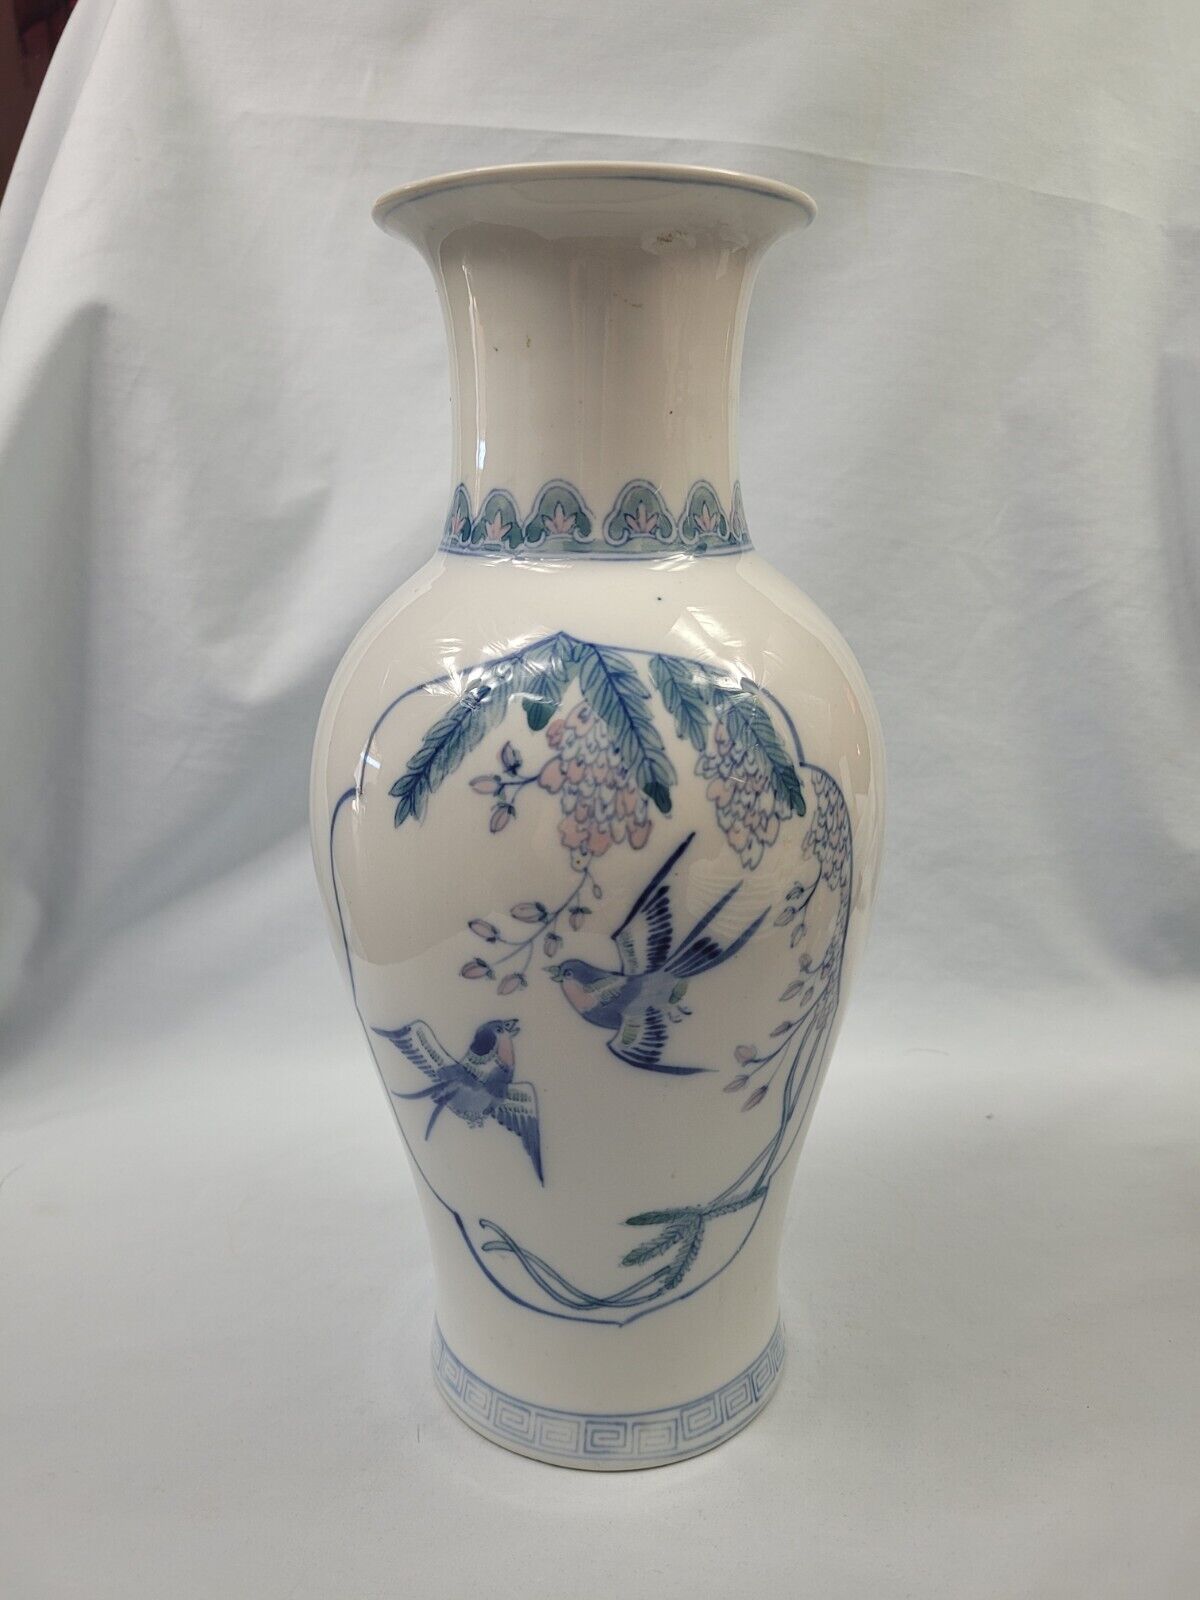 Vintage Classic Blue White Chinese Vase Watercolors Swallows Birds Floral EUC 